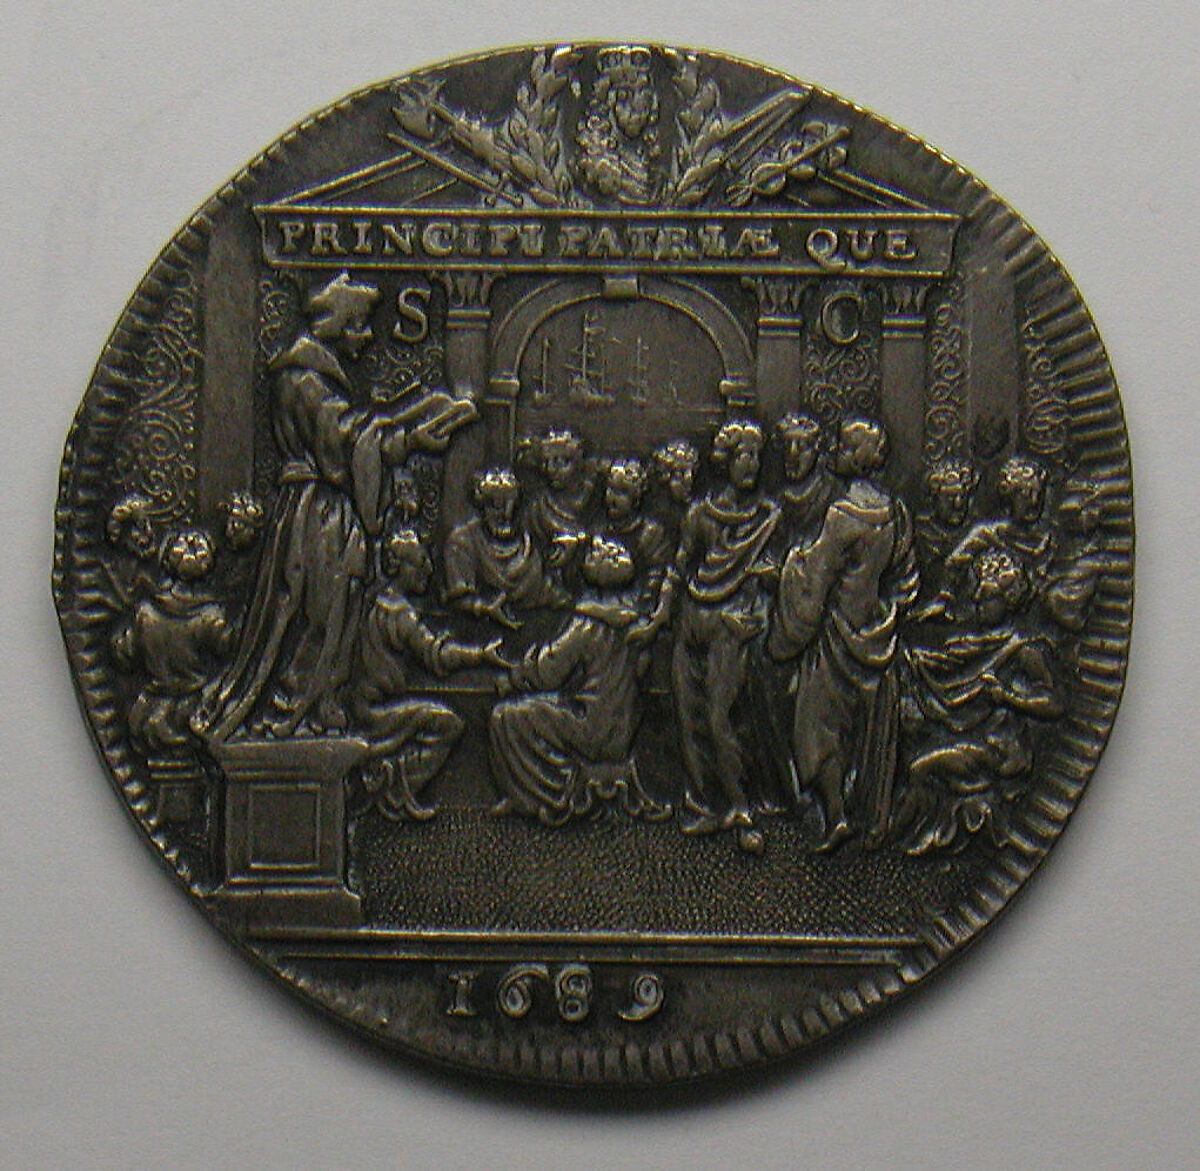 Rotterdam's celebration of the coronation of William of Orange as King of England, Silver, Dutch 